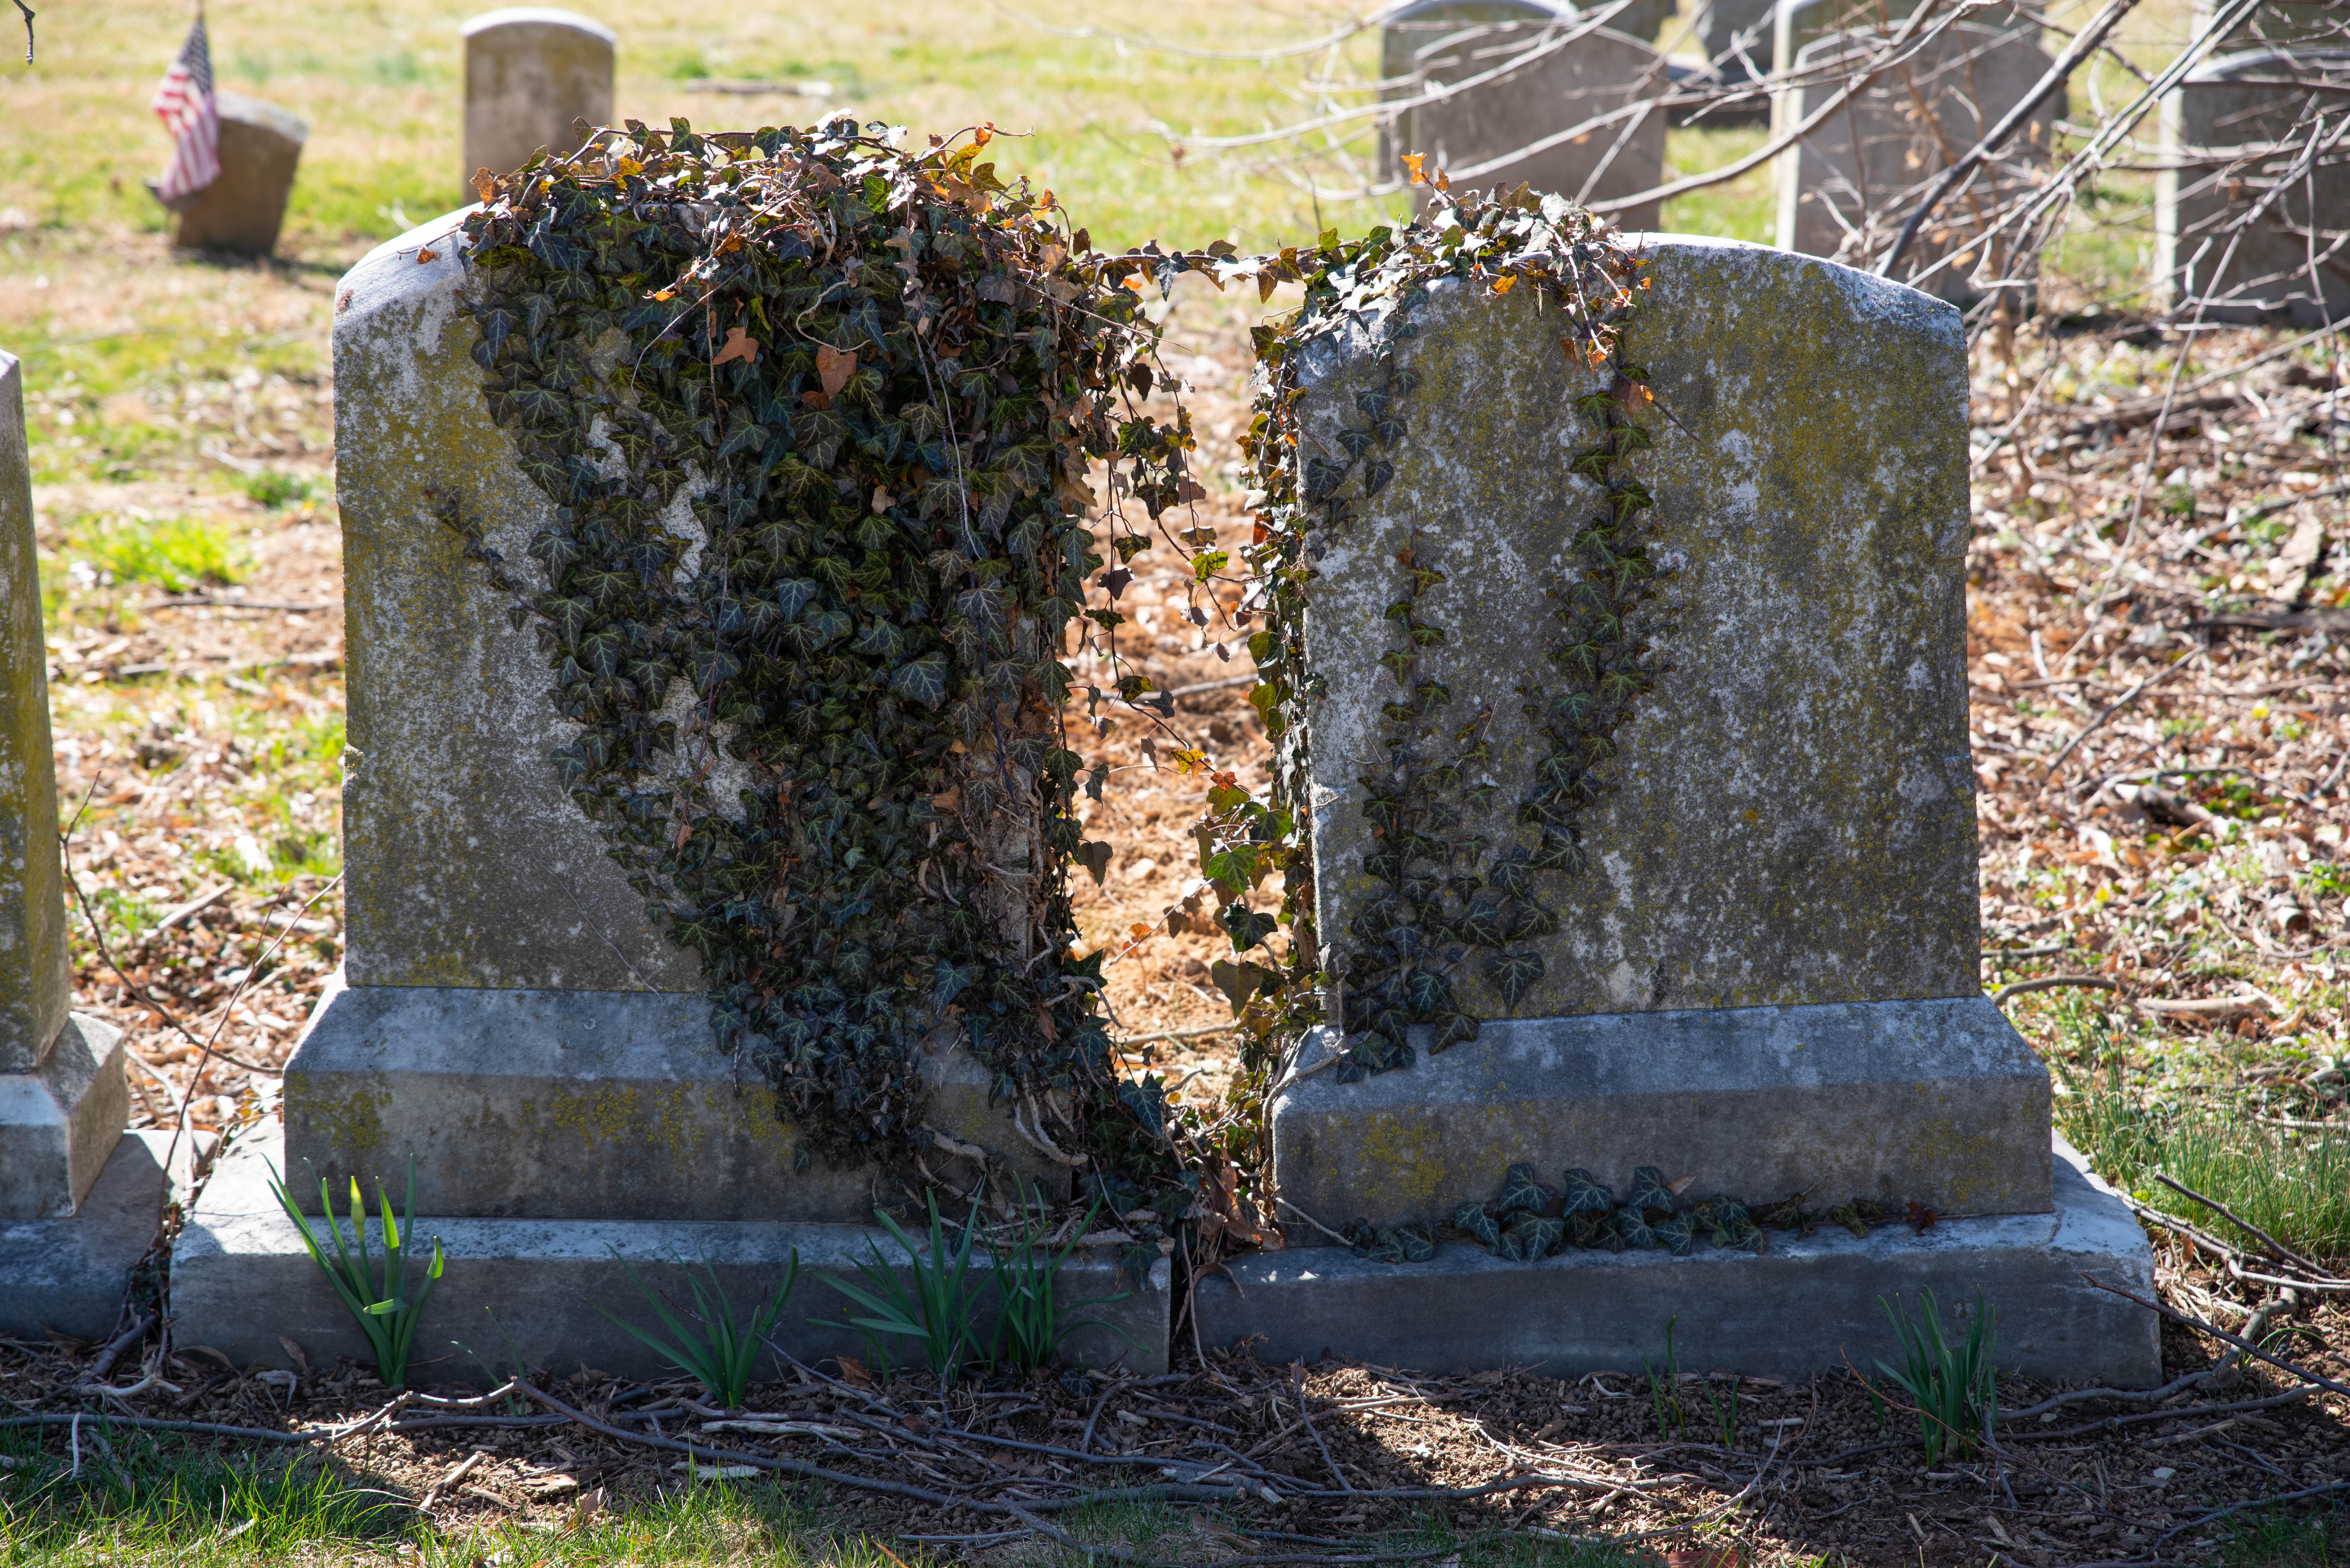 Overgrown graves in a cemetery | Source: Shutterstock